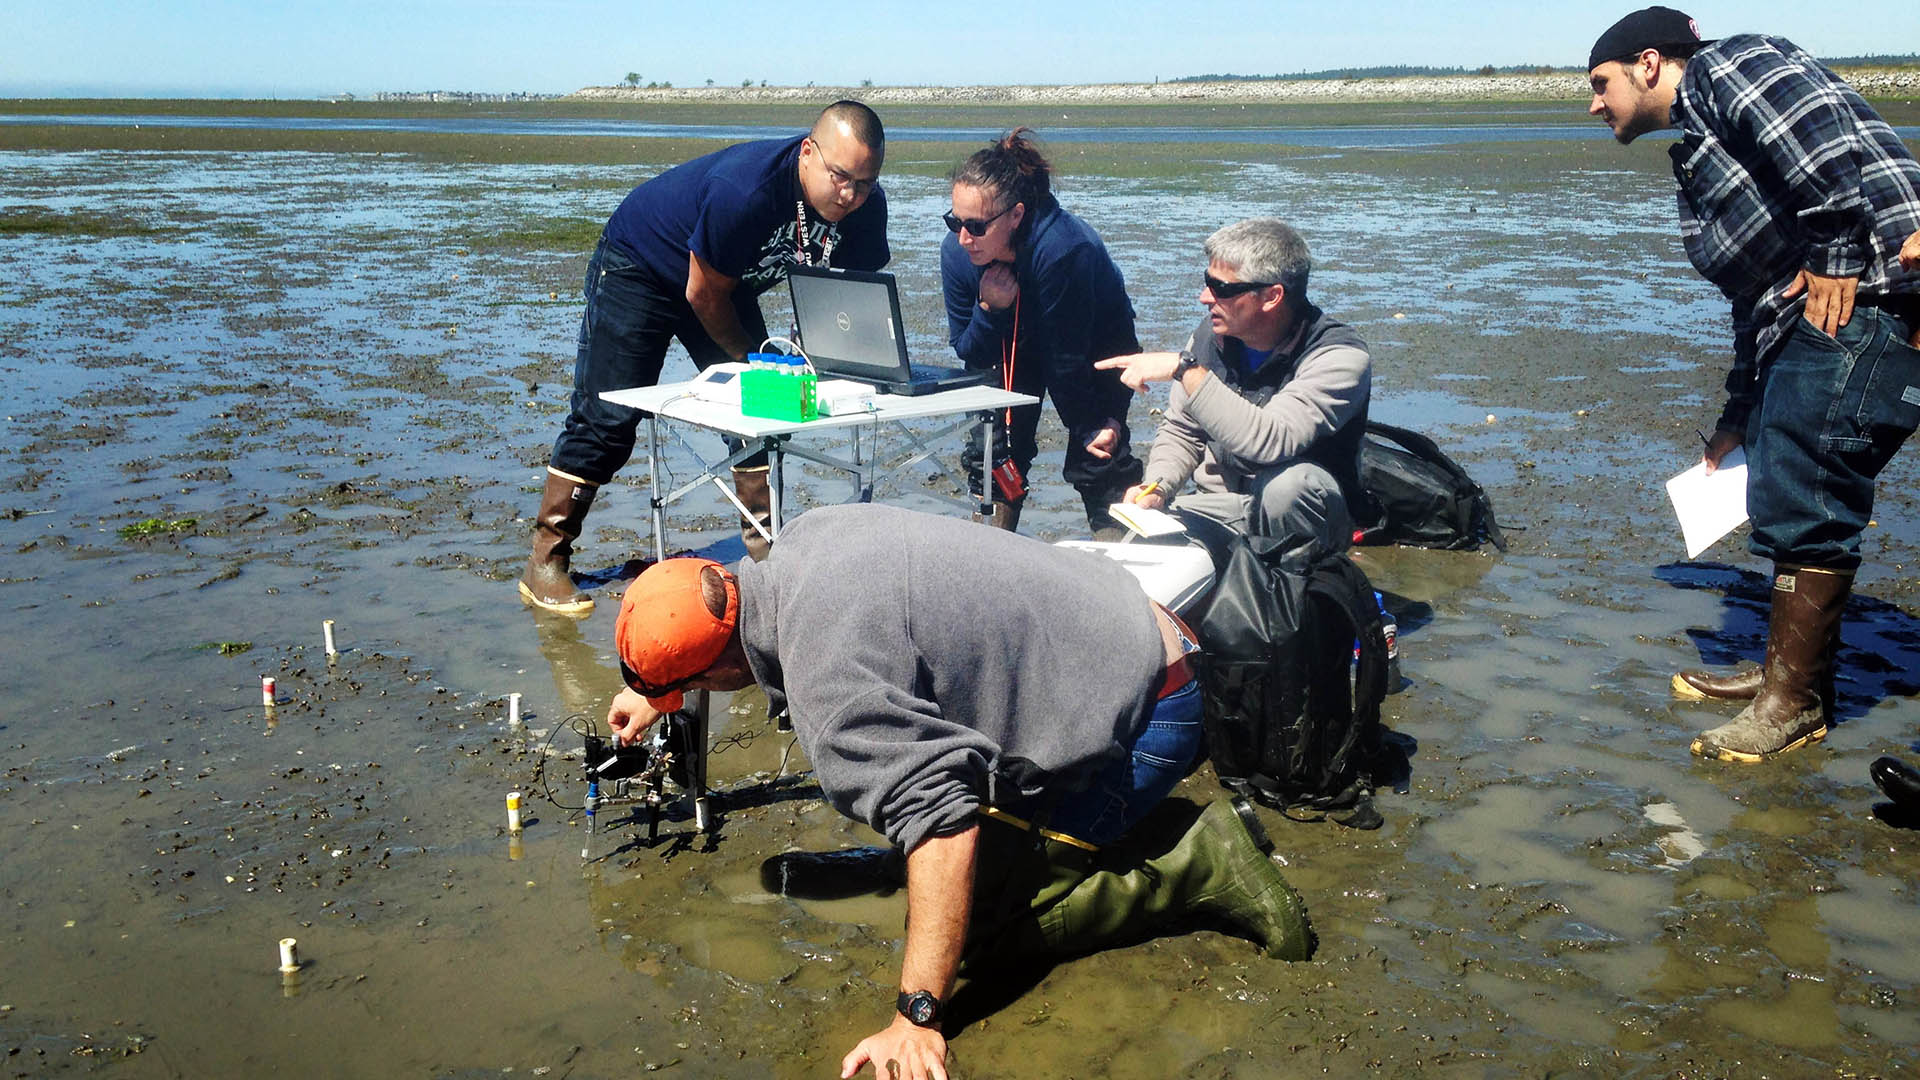 On a sunny day under clear blue skies, five people gather around a white folding table in an intertidal area. Four of them peer at a laptop screen while a fifth kneels down to adjust equipment secured in the exposed seafloor. 